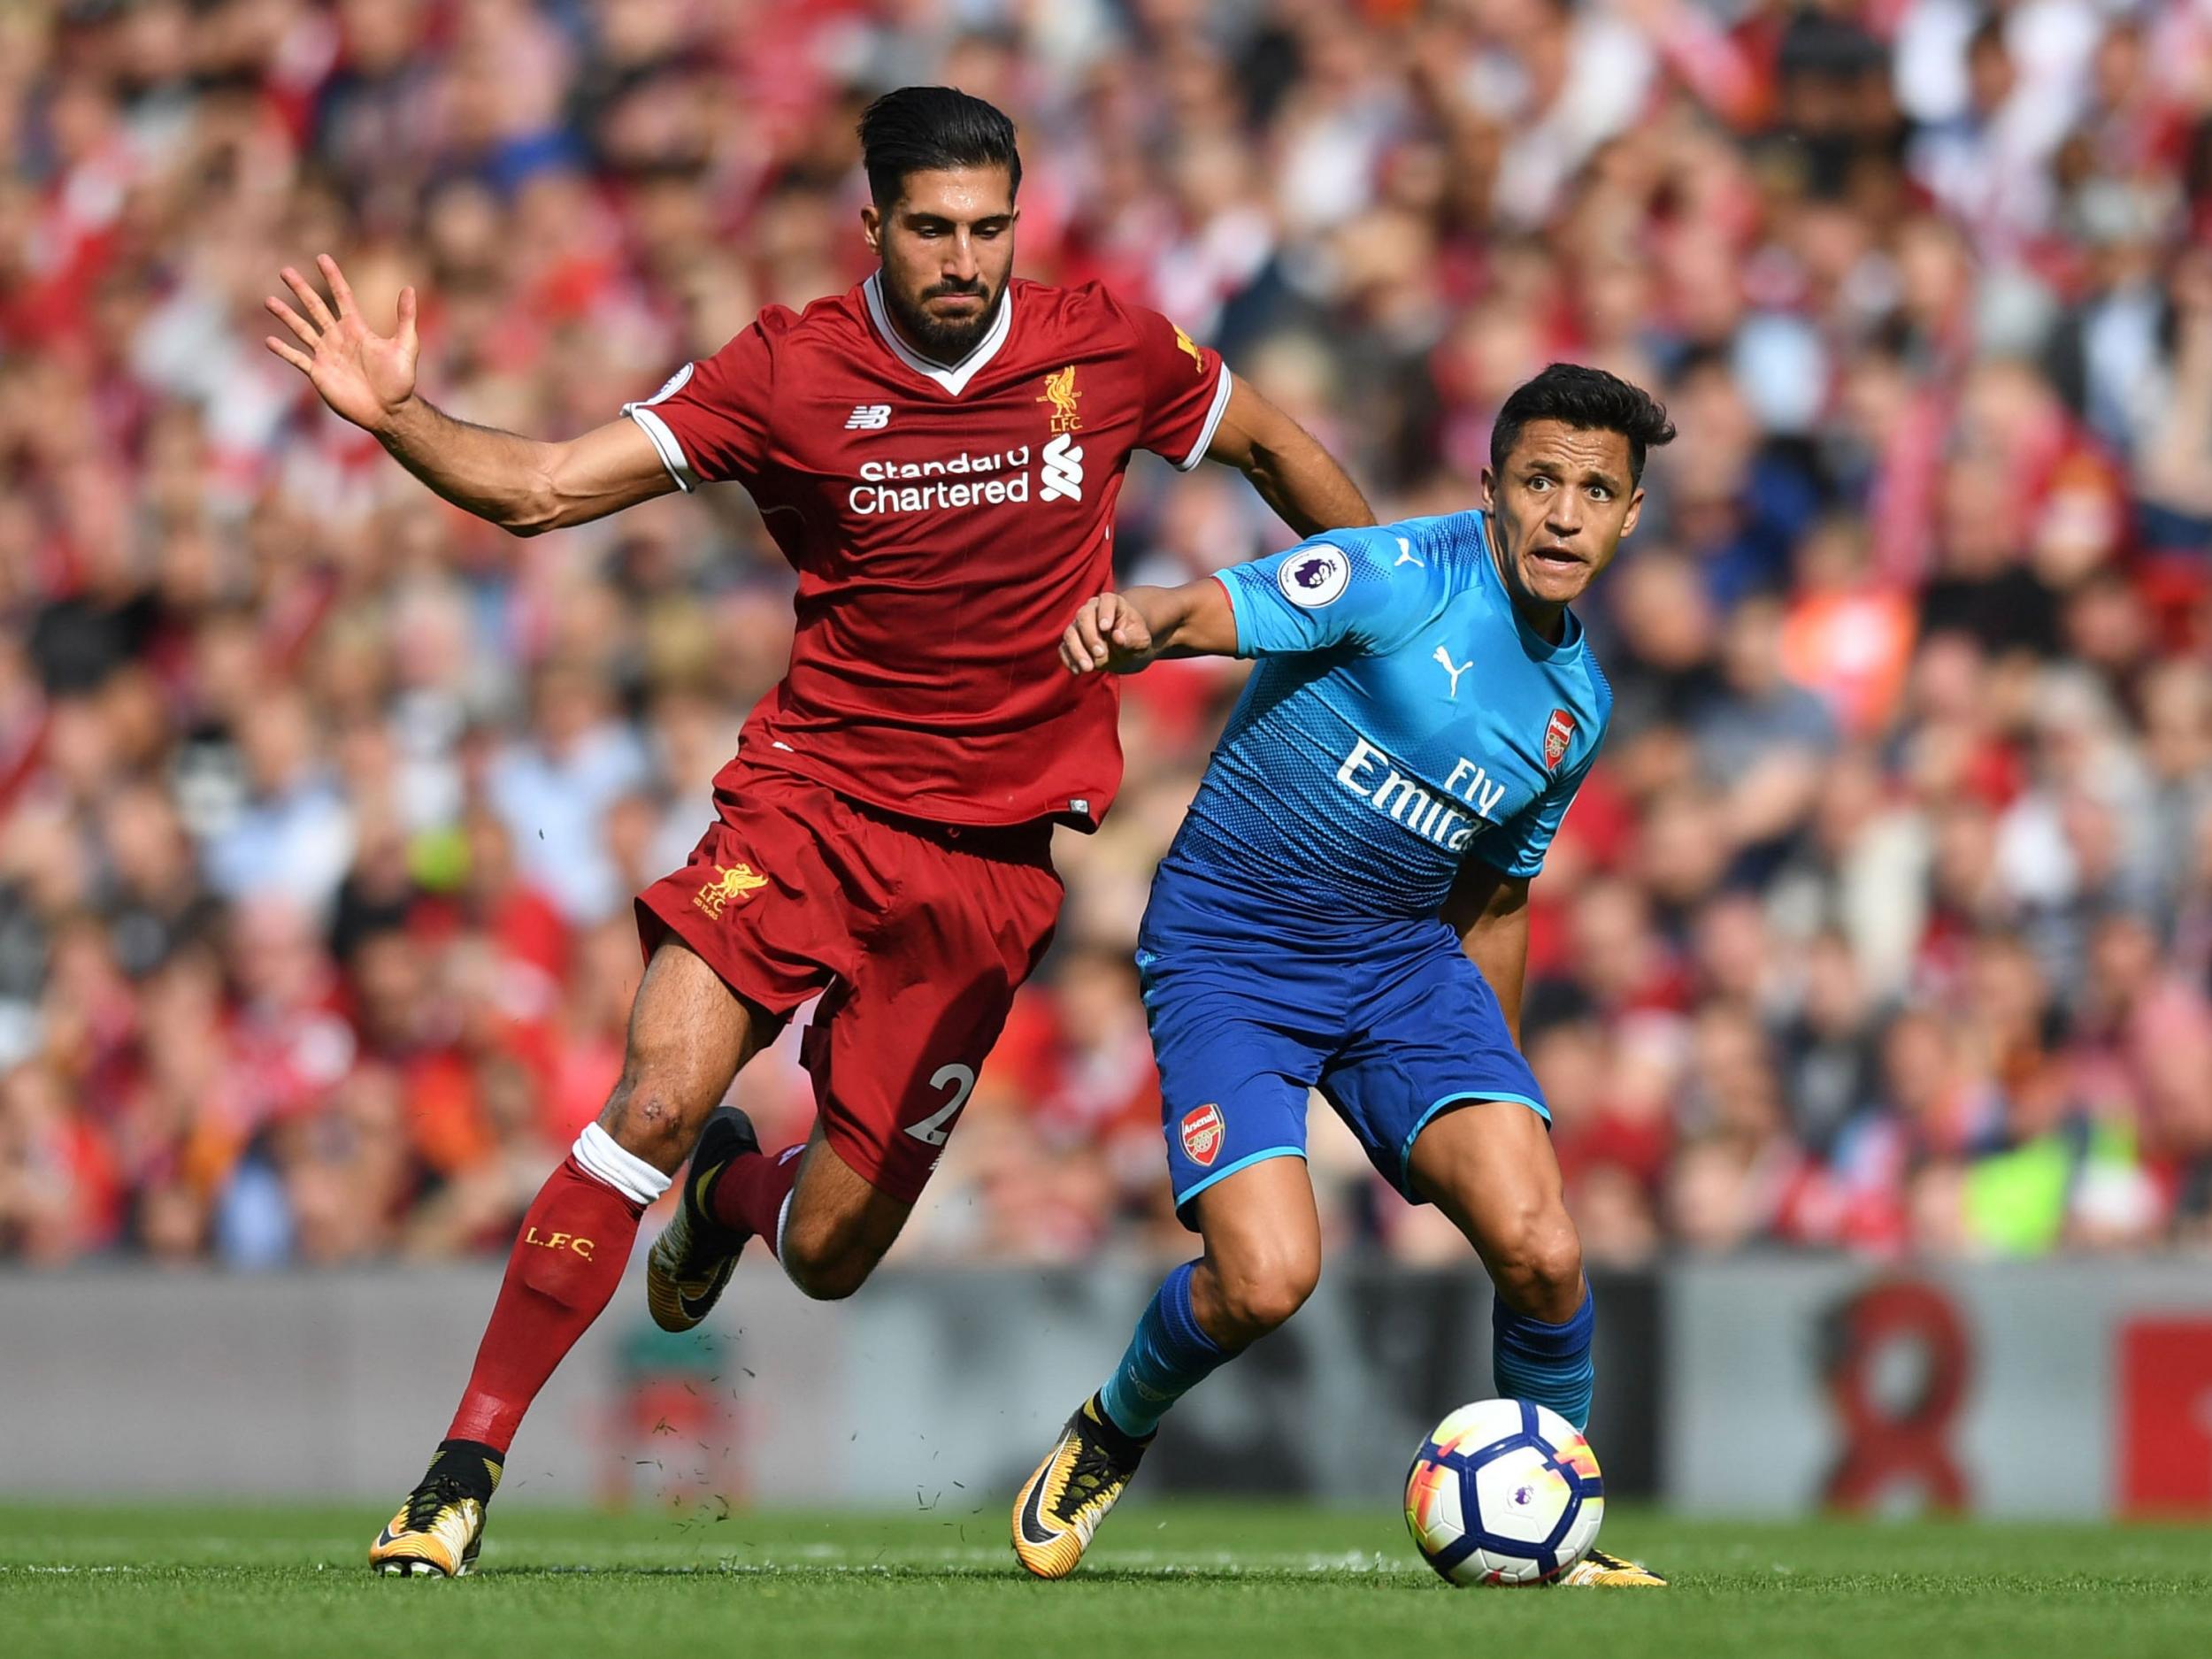 Emre Can impressed yet again in a marauding midfield role